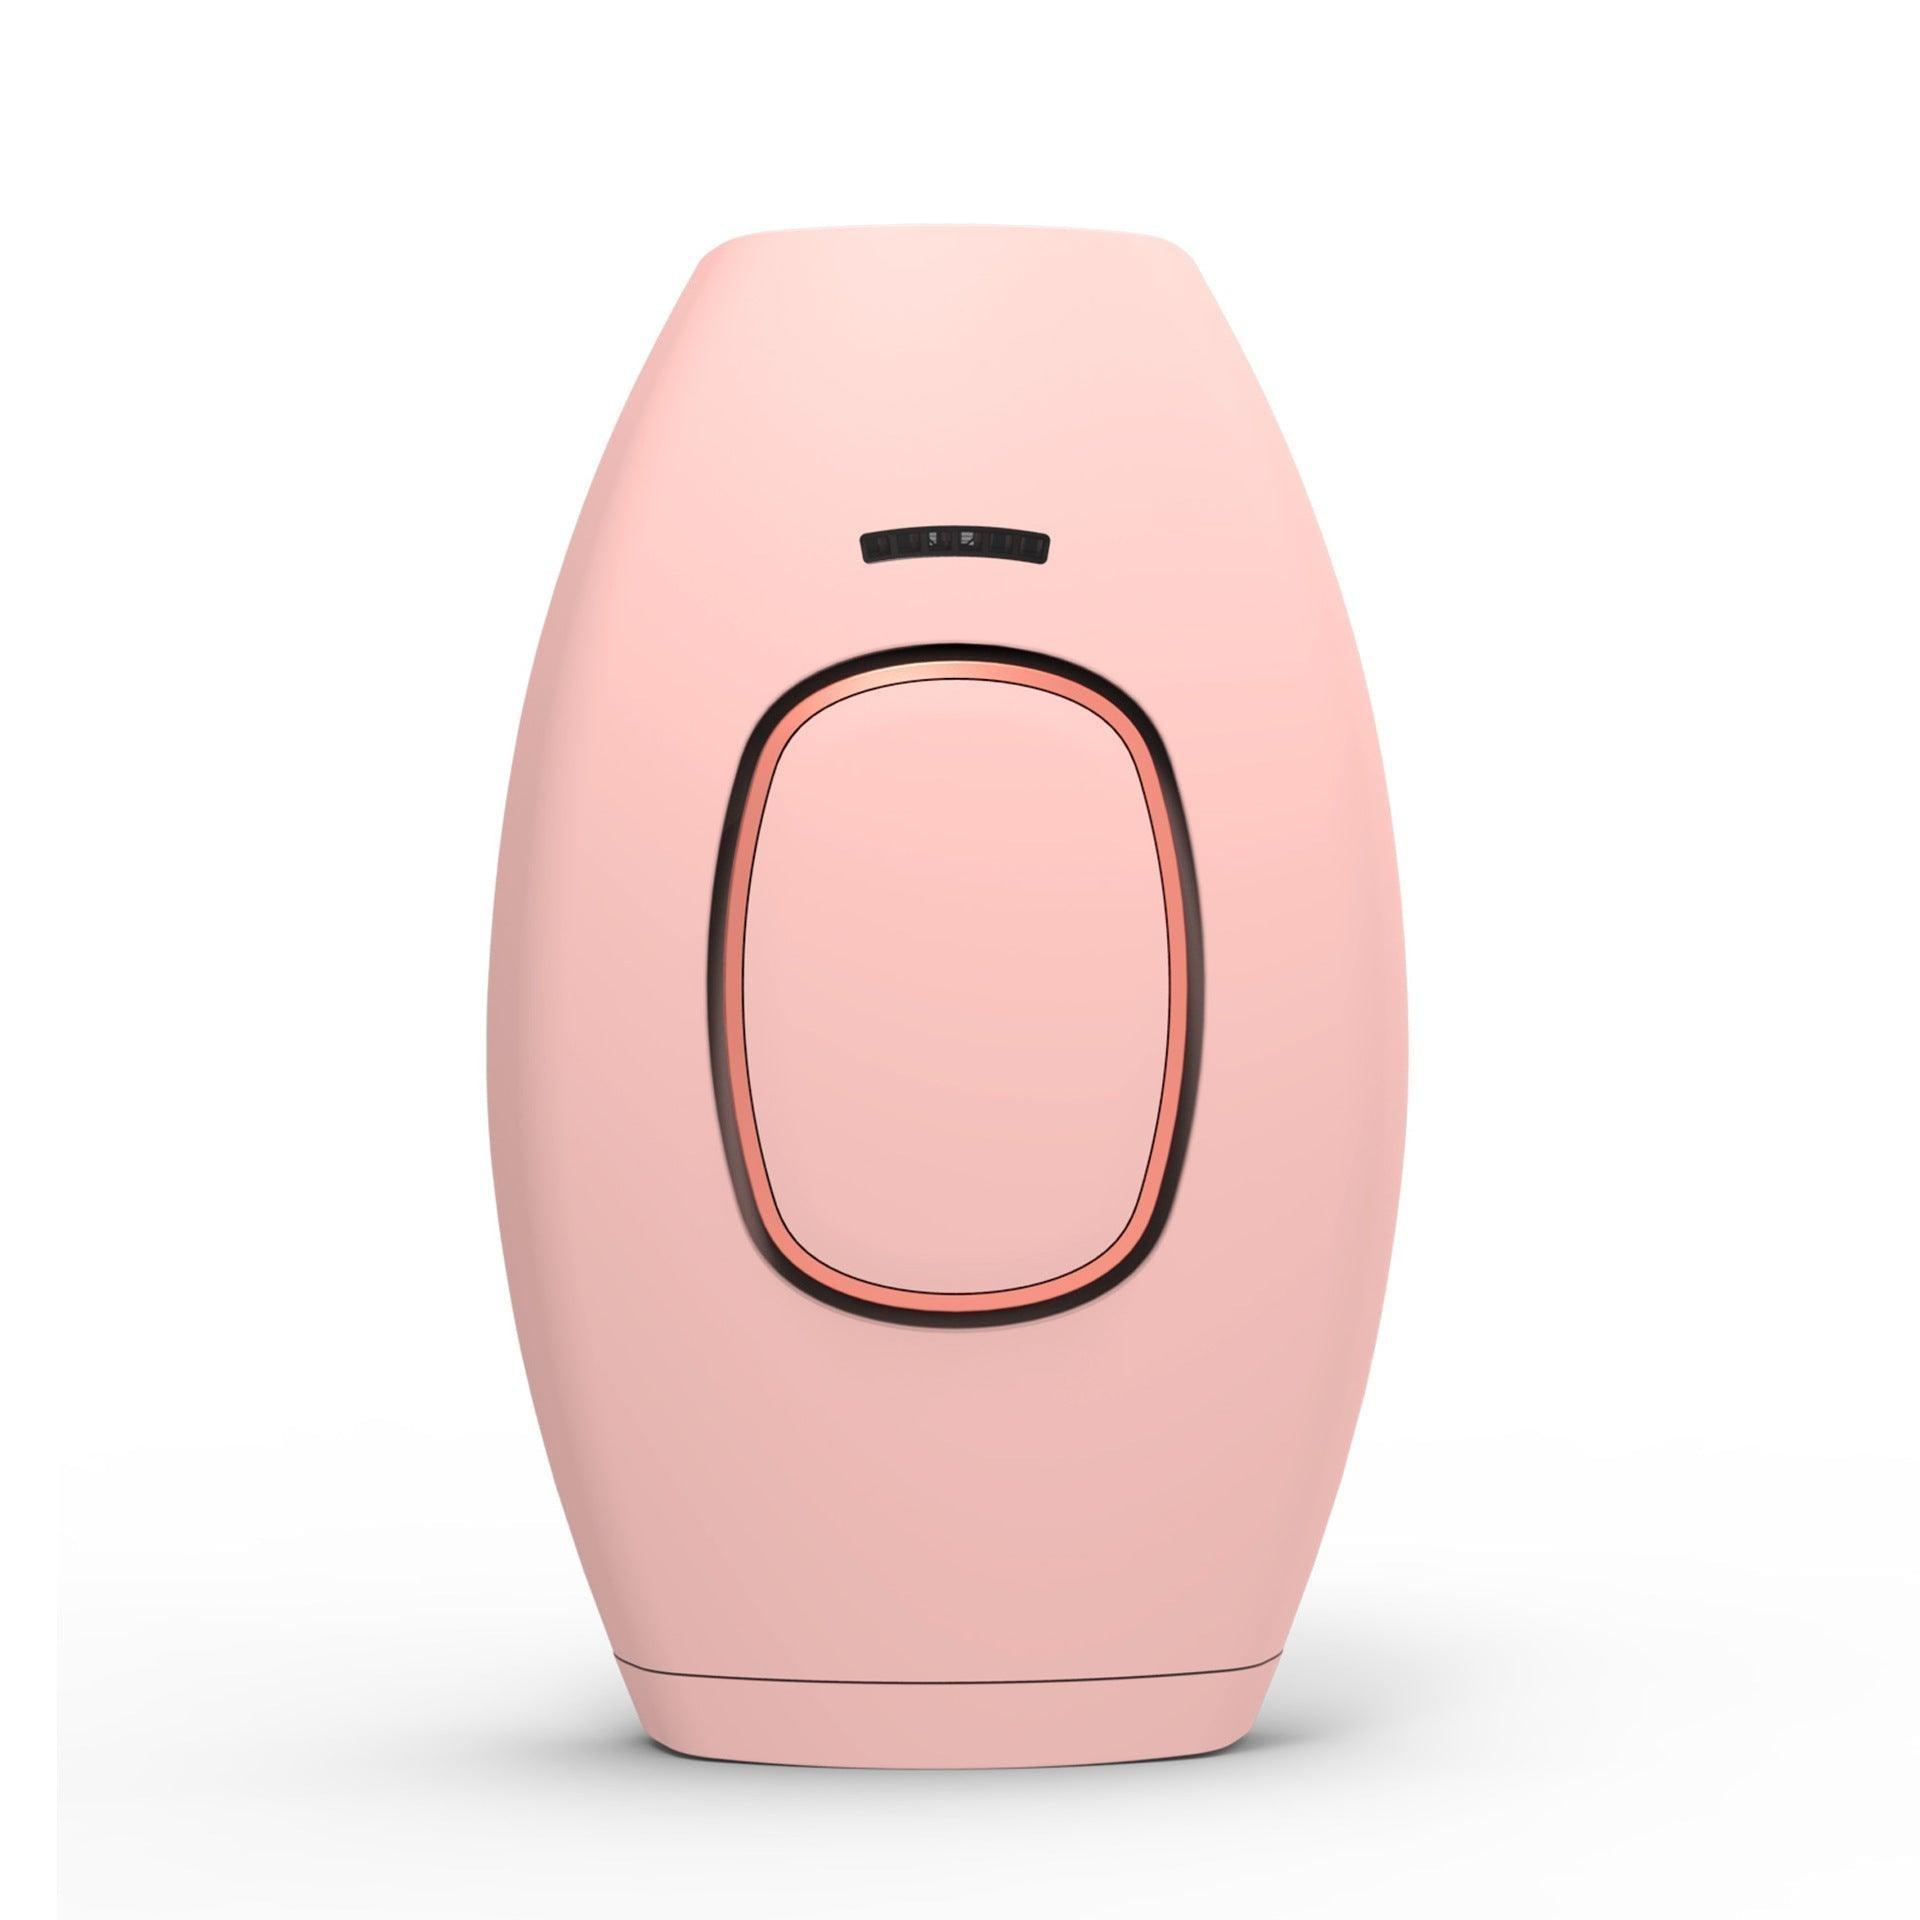 Home Laser Hair Removal Device - Silvis21 ™